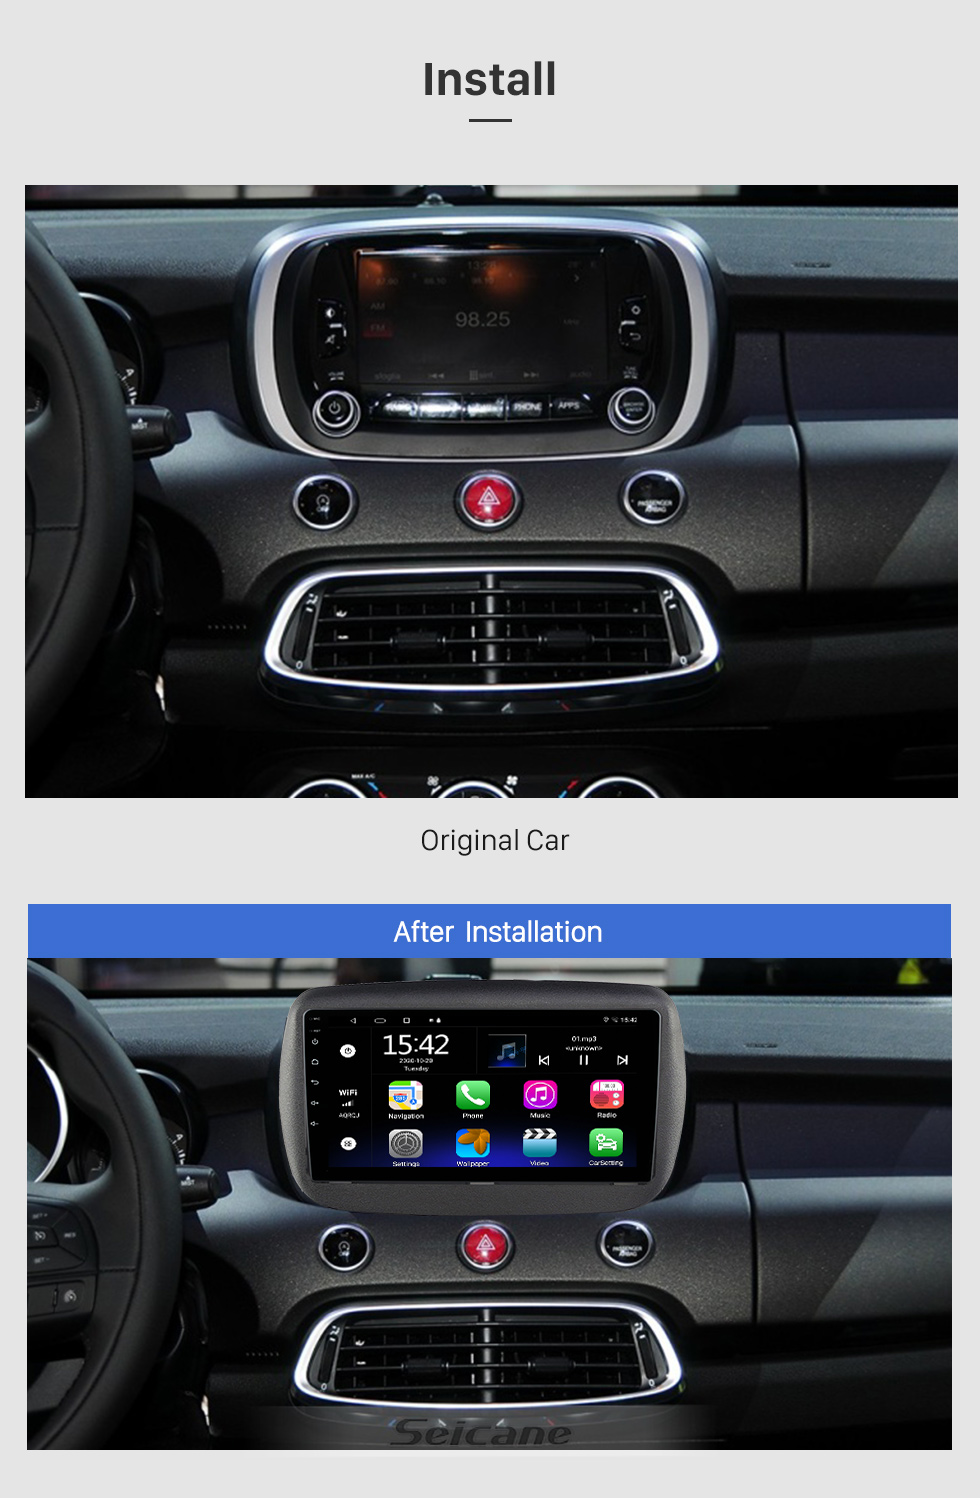 9 Inch HD Touchscreen for 2015+ FIAT 500 Radio Car GPS Navigation Stereo  Car Radio Bluetooth Support Picture in Picture